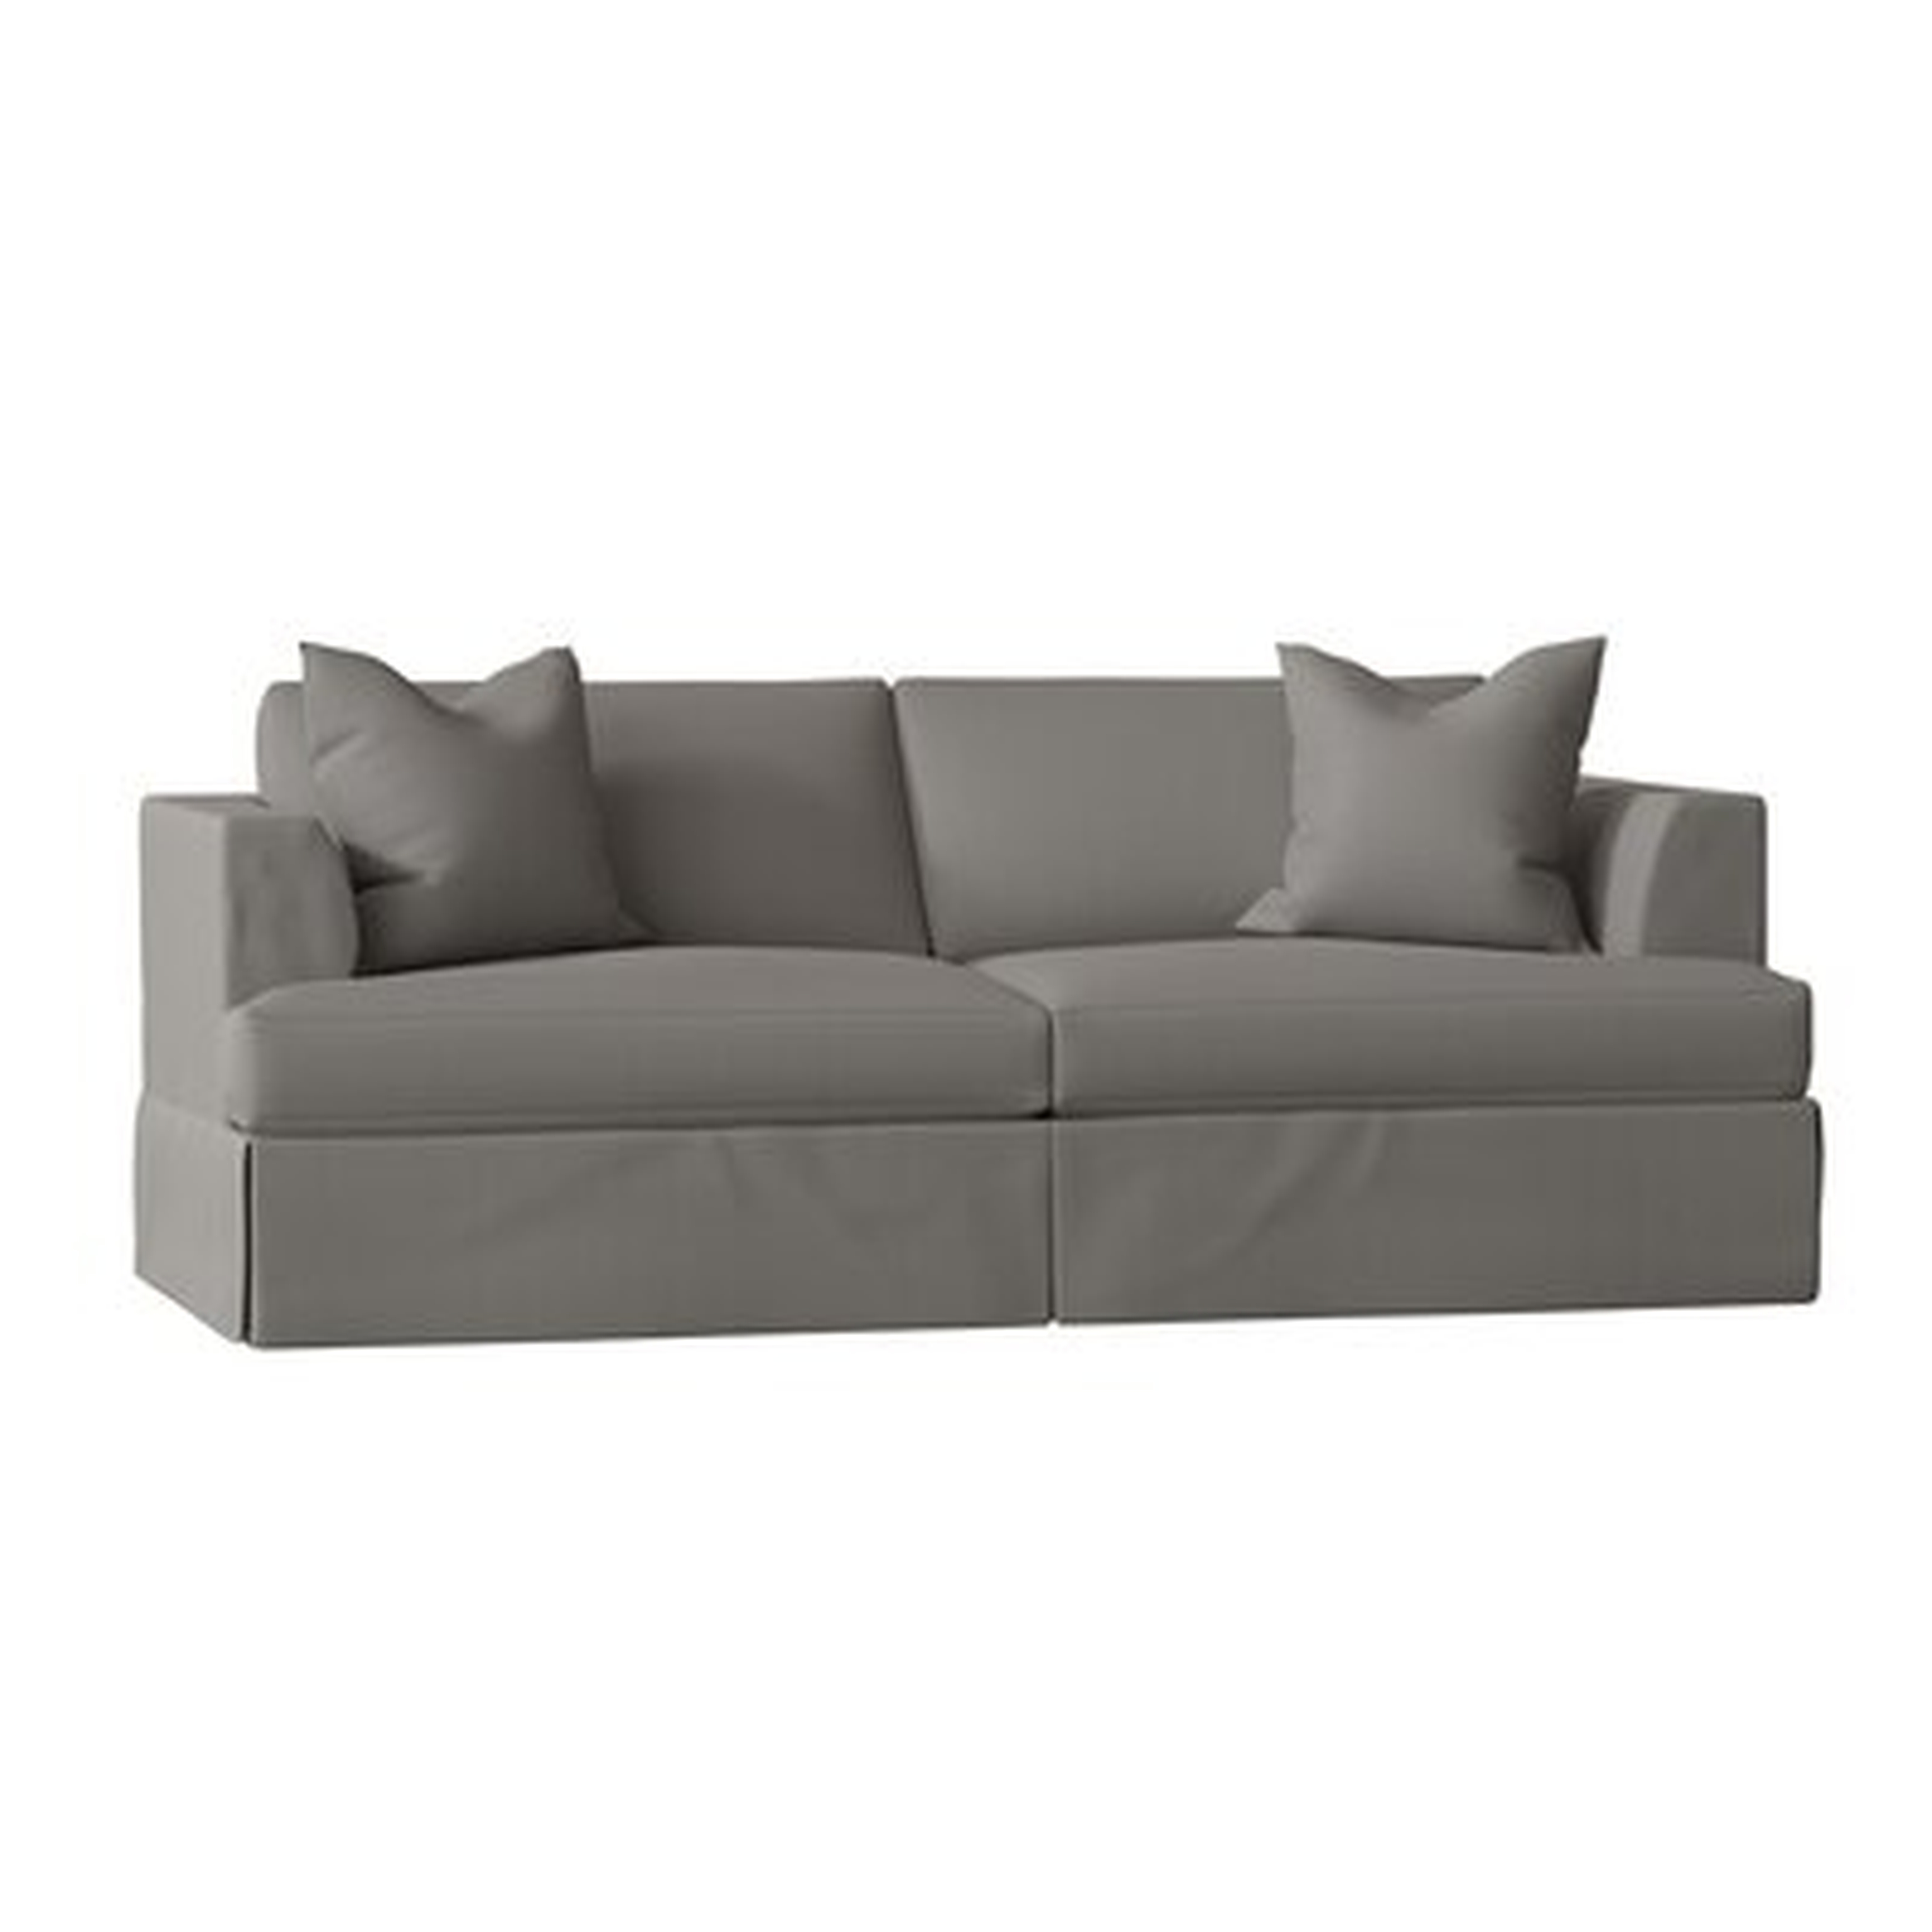 Carly 93" W Recessed Arm Sofa Bed - Wayfair